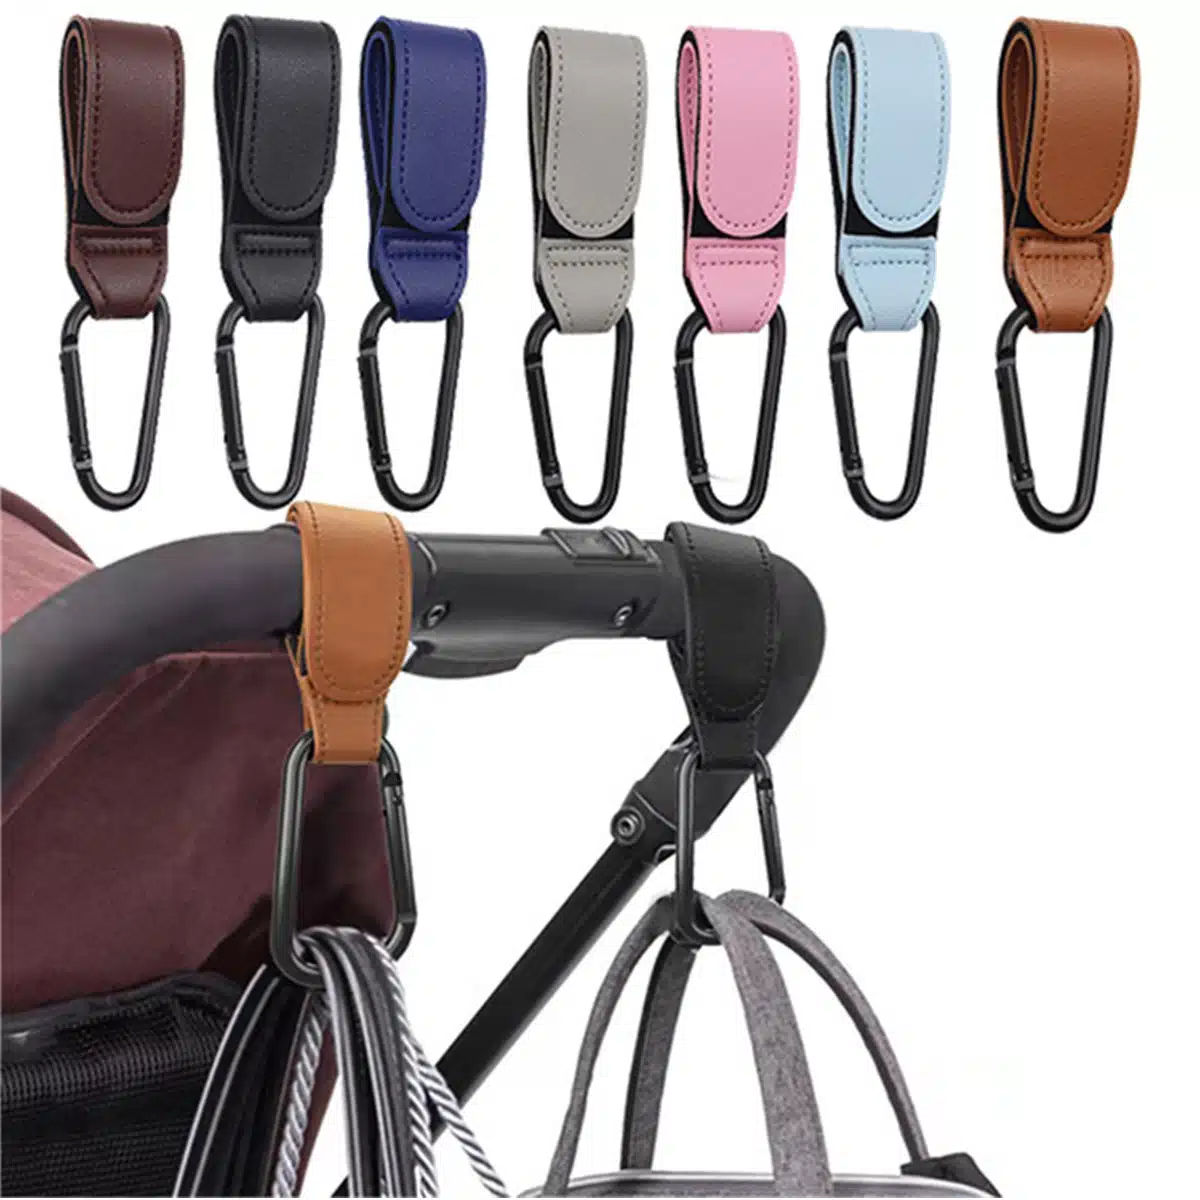 Keep Your Hands Free with the Stroller Hook